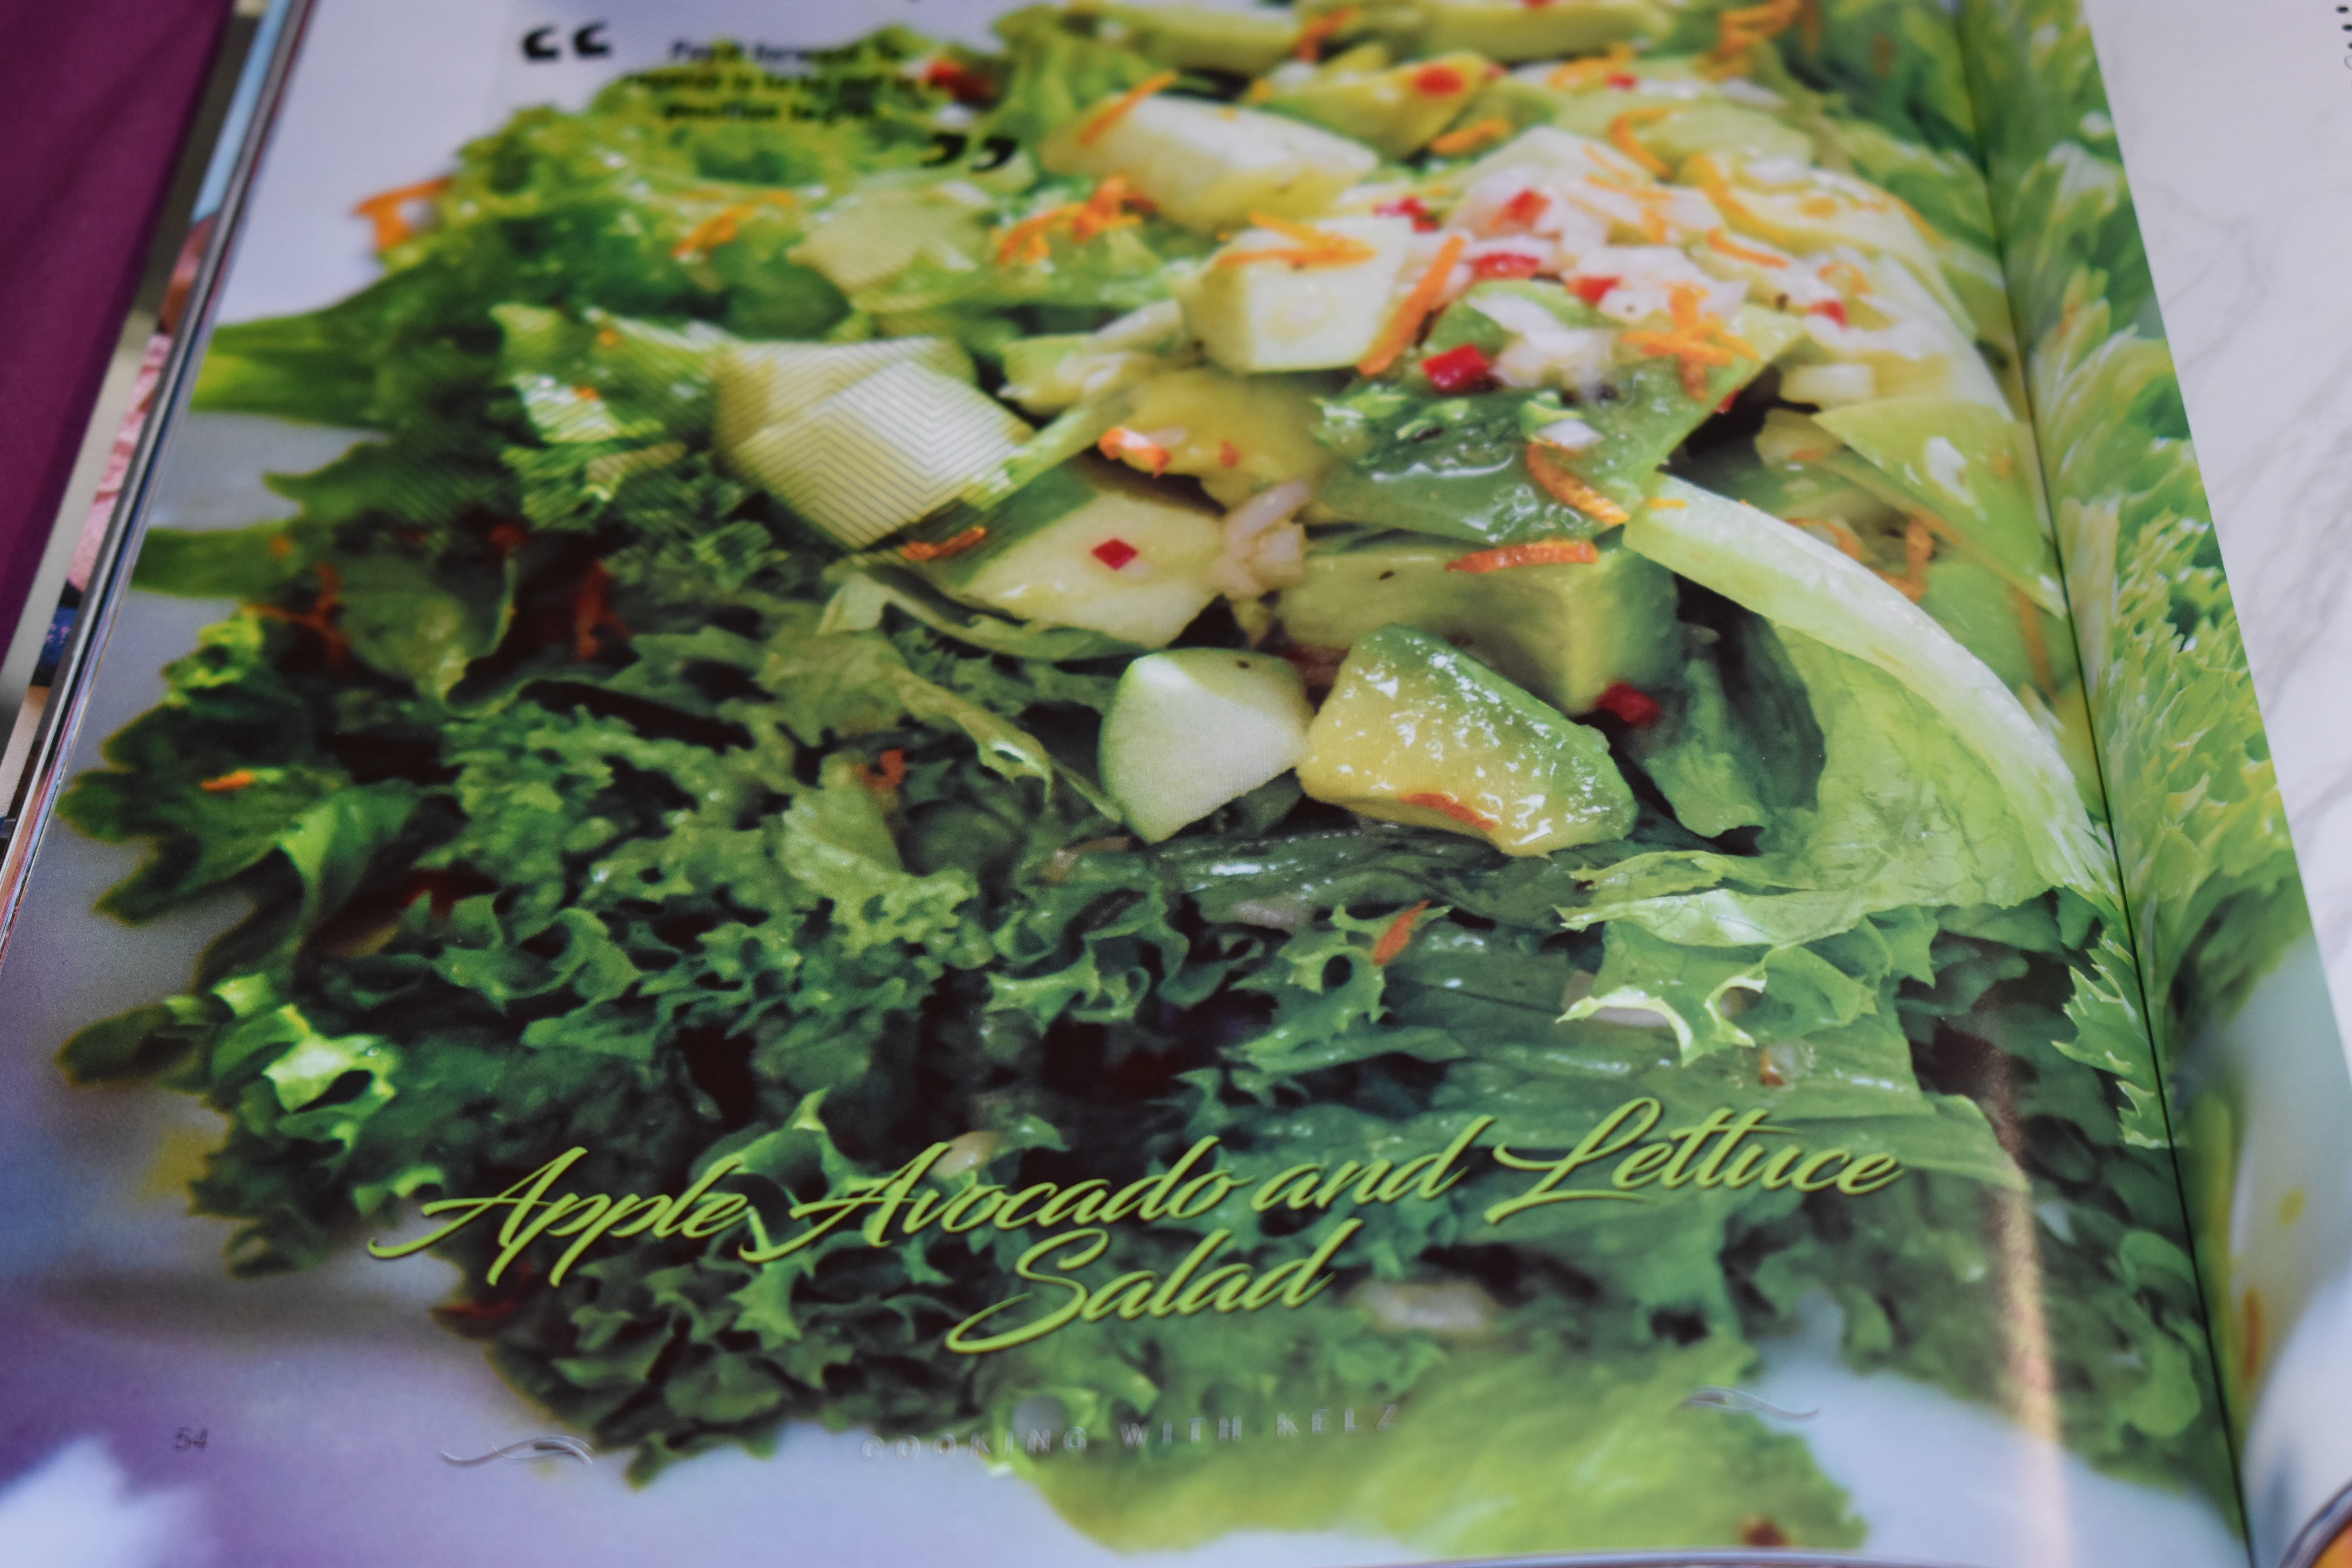 Apple, avocado and lettuce salad. Cook book, recipes.